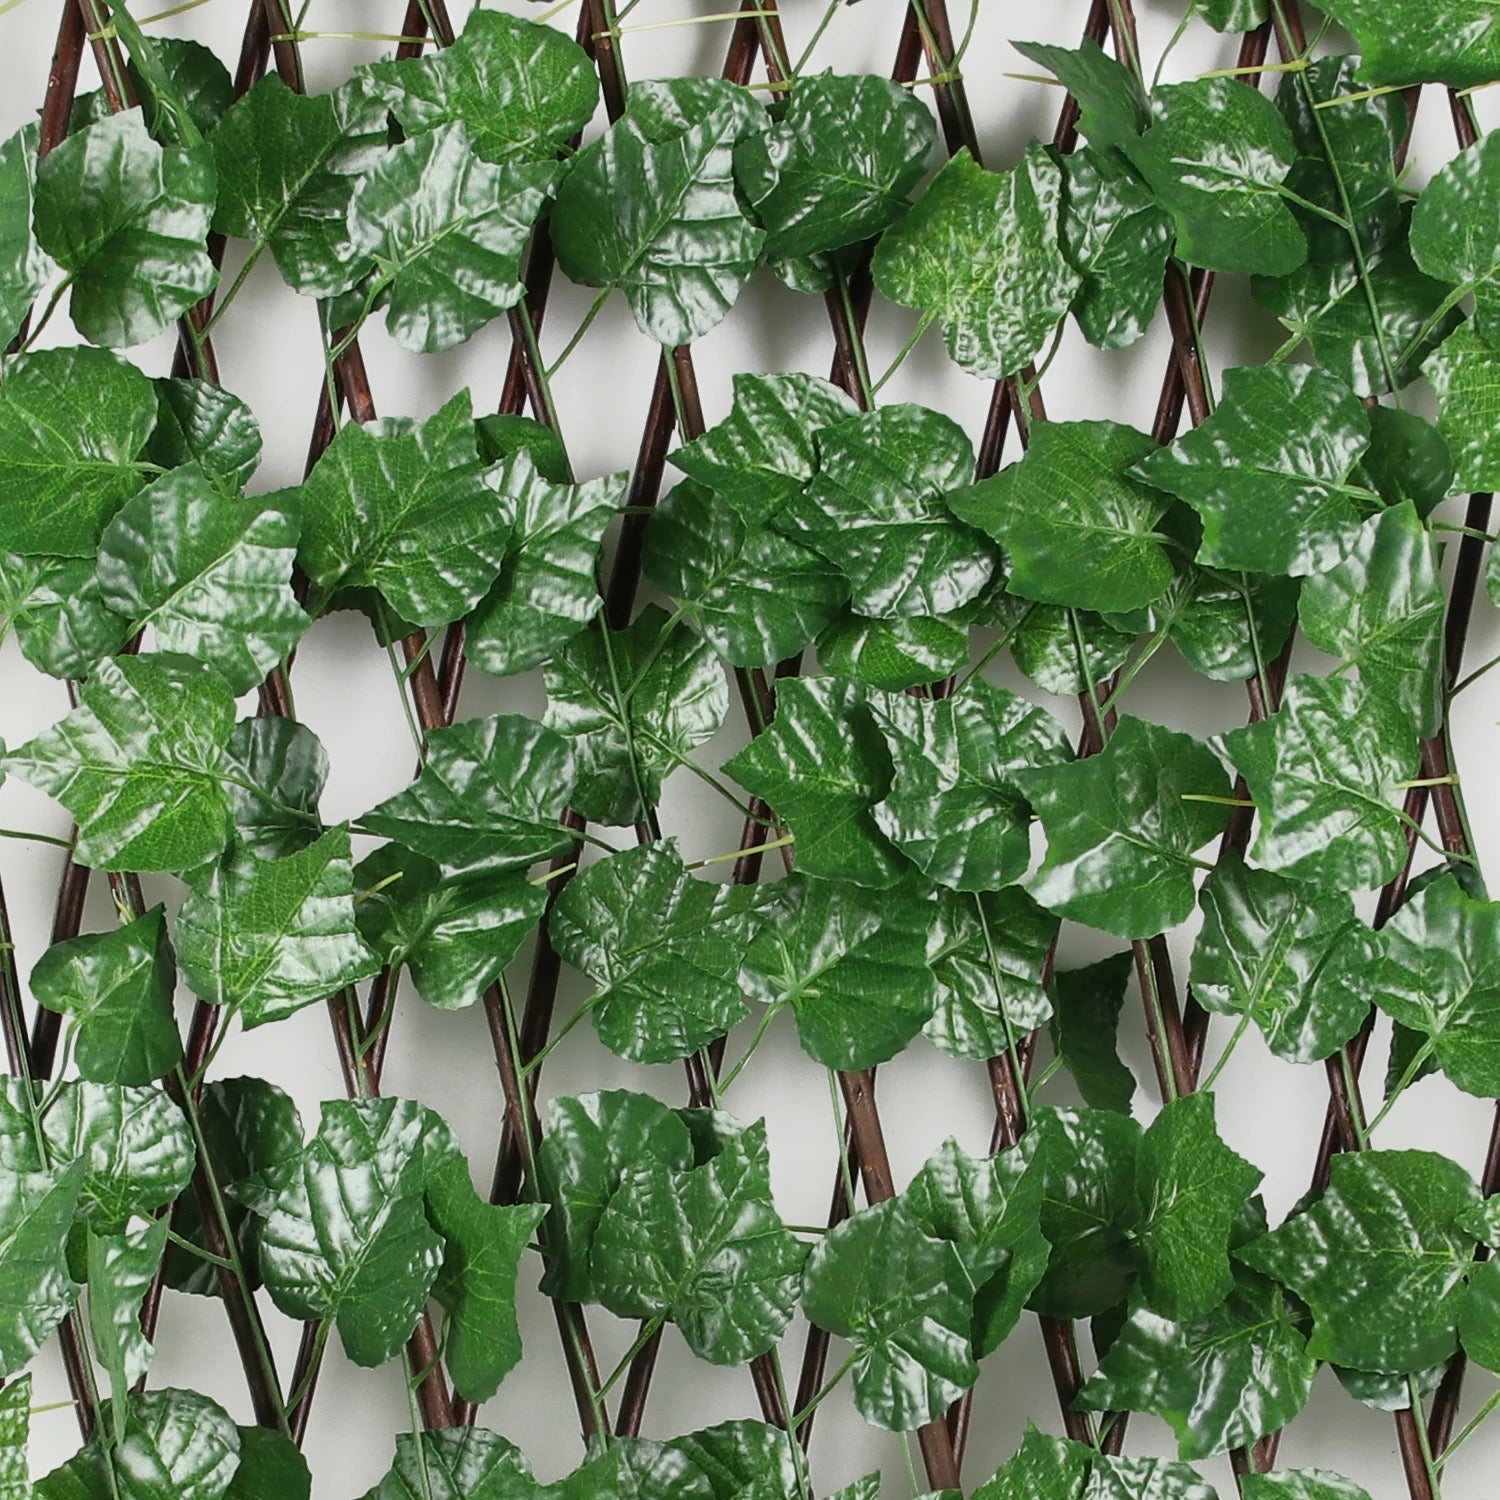 Showcasing Artificial leaf fence in close up